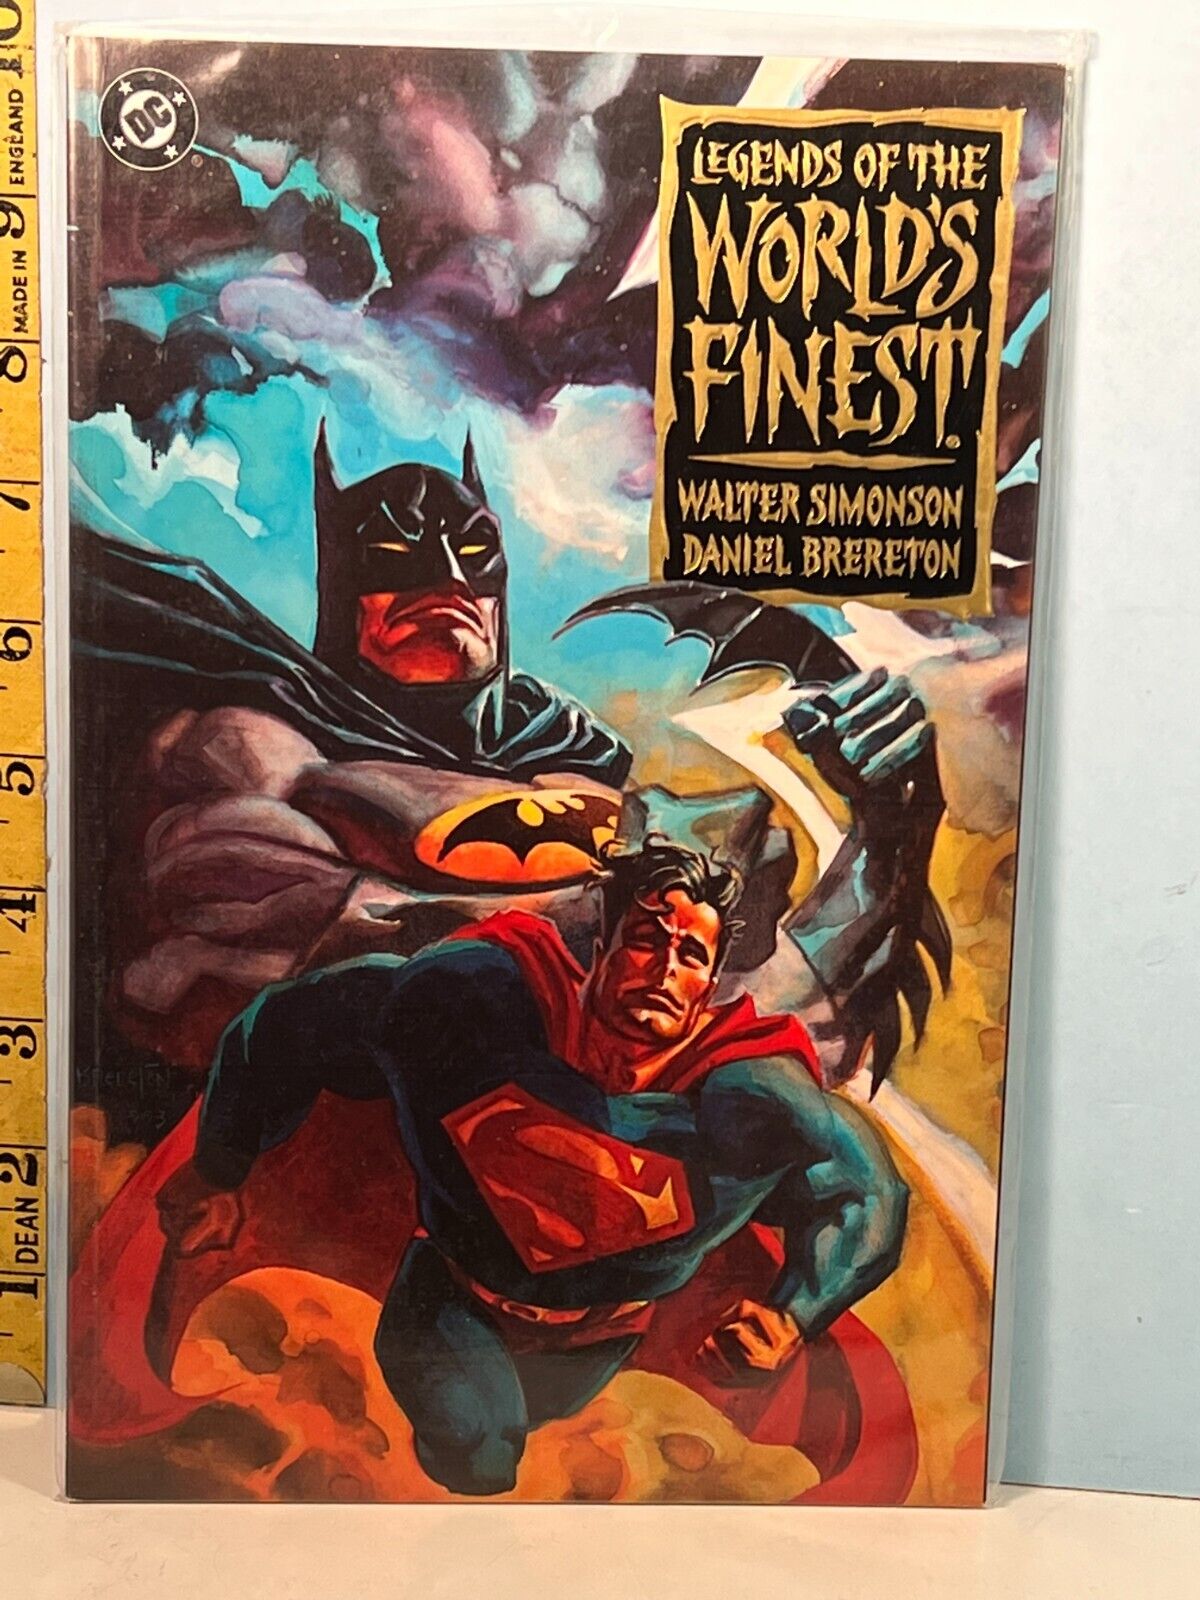 1998 DC Legends of the Worlds Finest #1 Single Issue GN VF